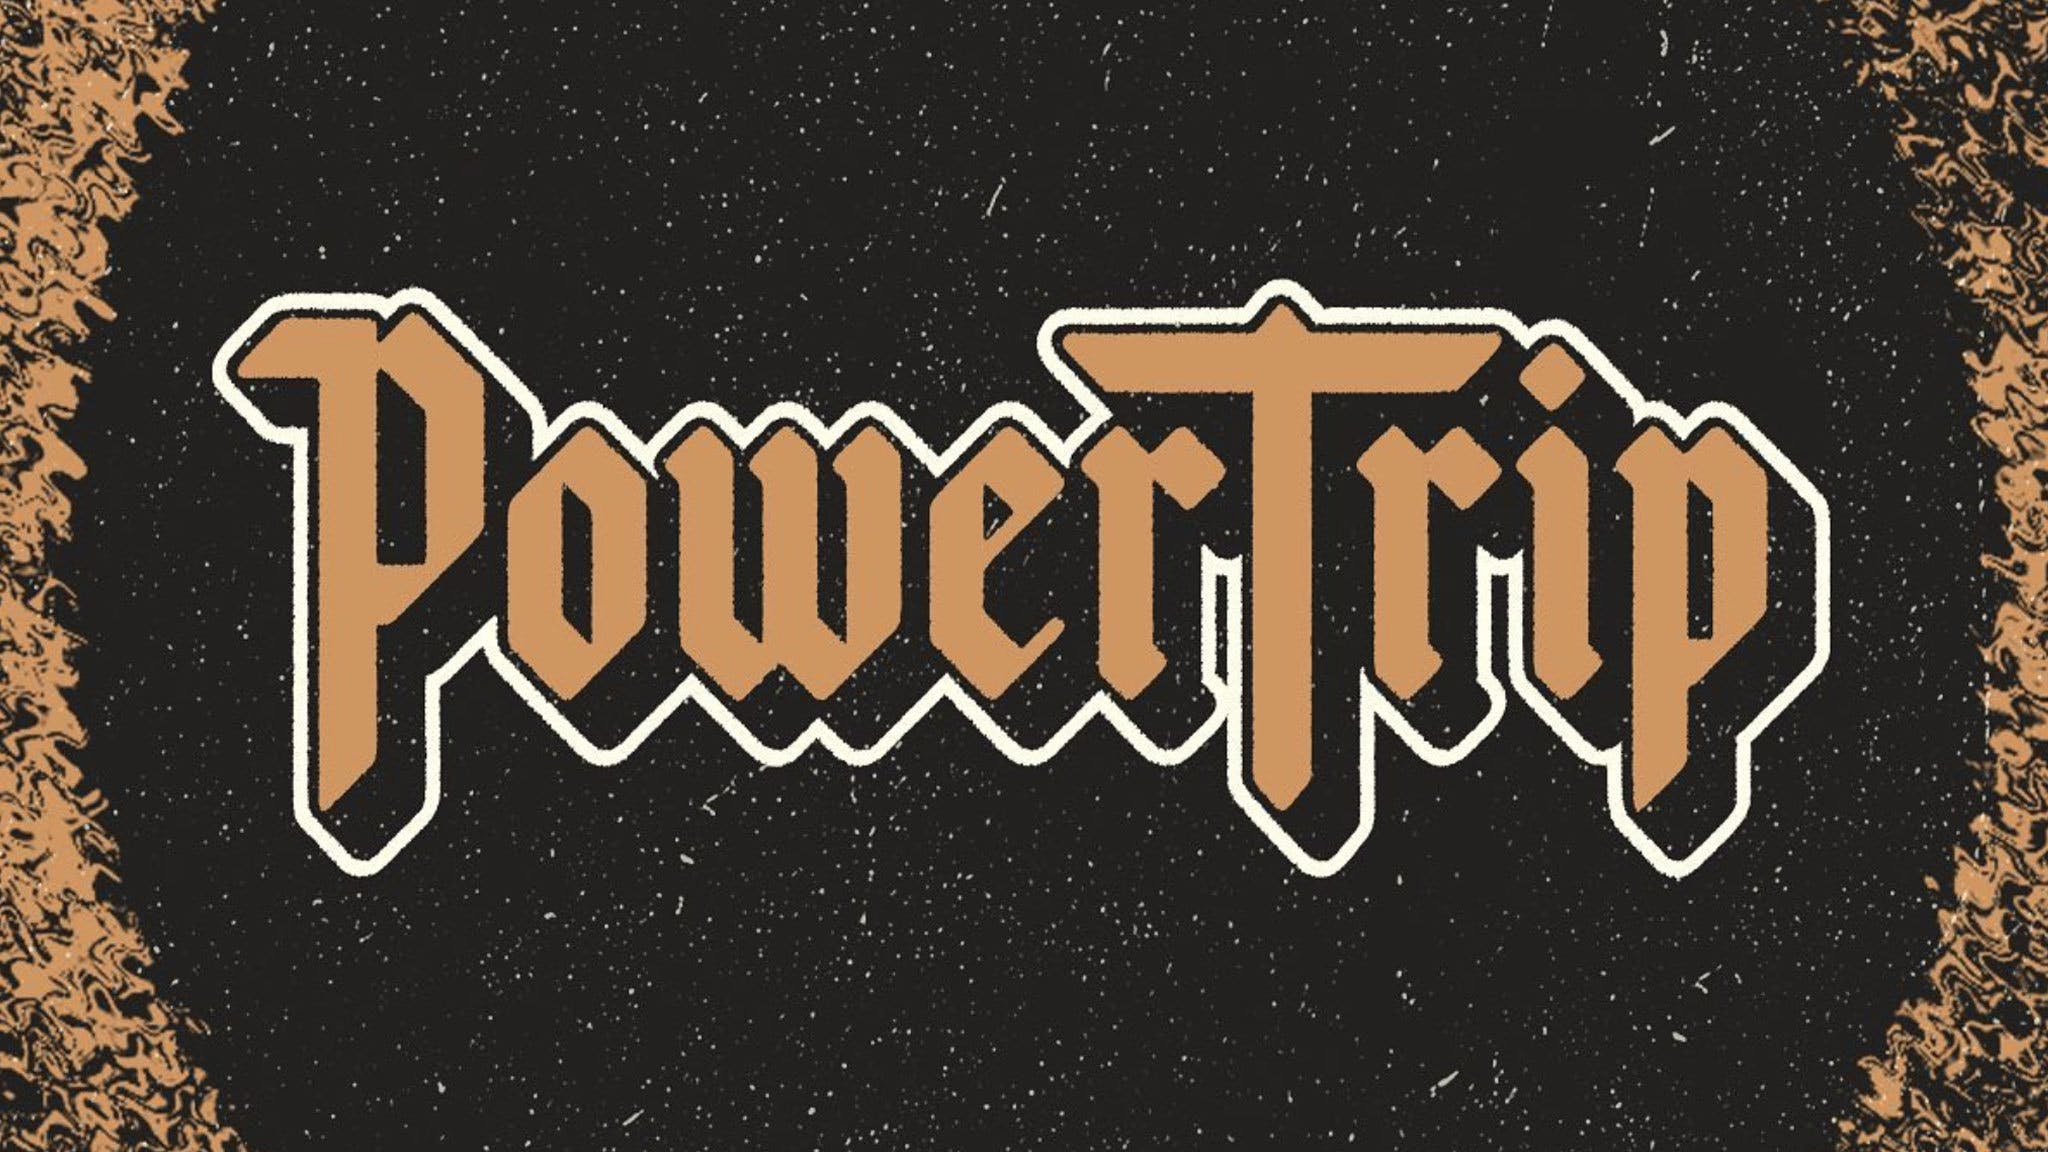 AC/DC, Ozzy, Maiden and more are teasing a massive festival, Power Trip